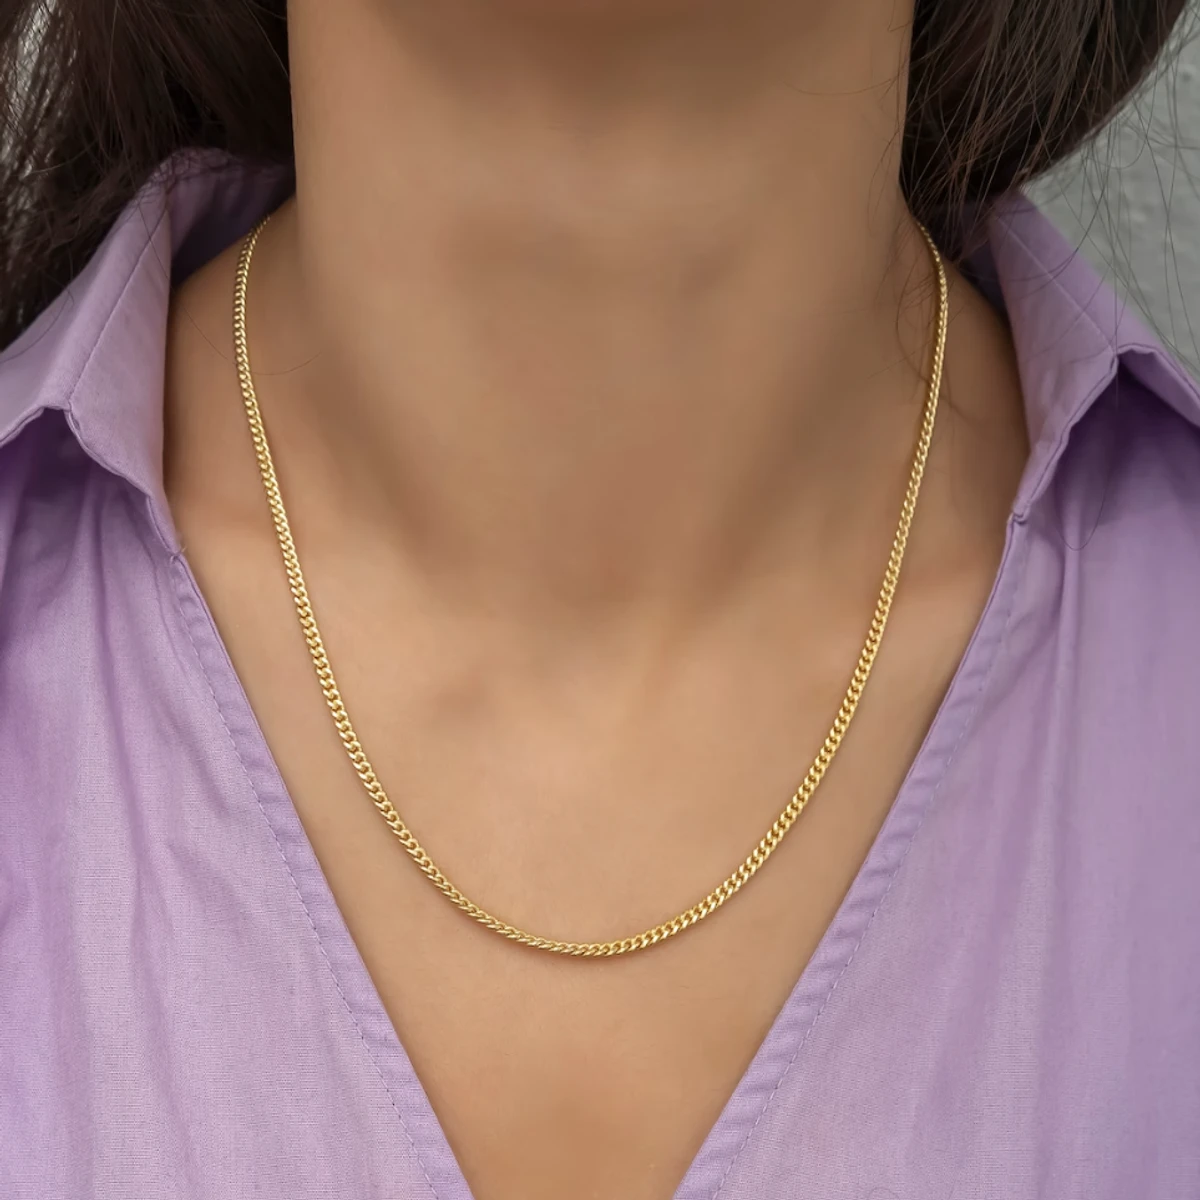 New Stylish & Fancy Exclusive Gold Plated Necklace Chain for Women and Girls